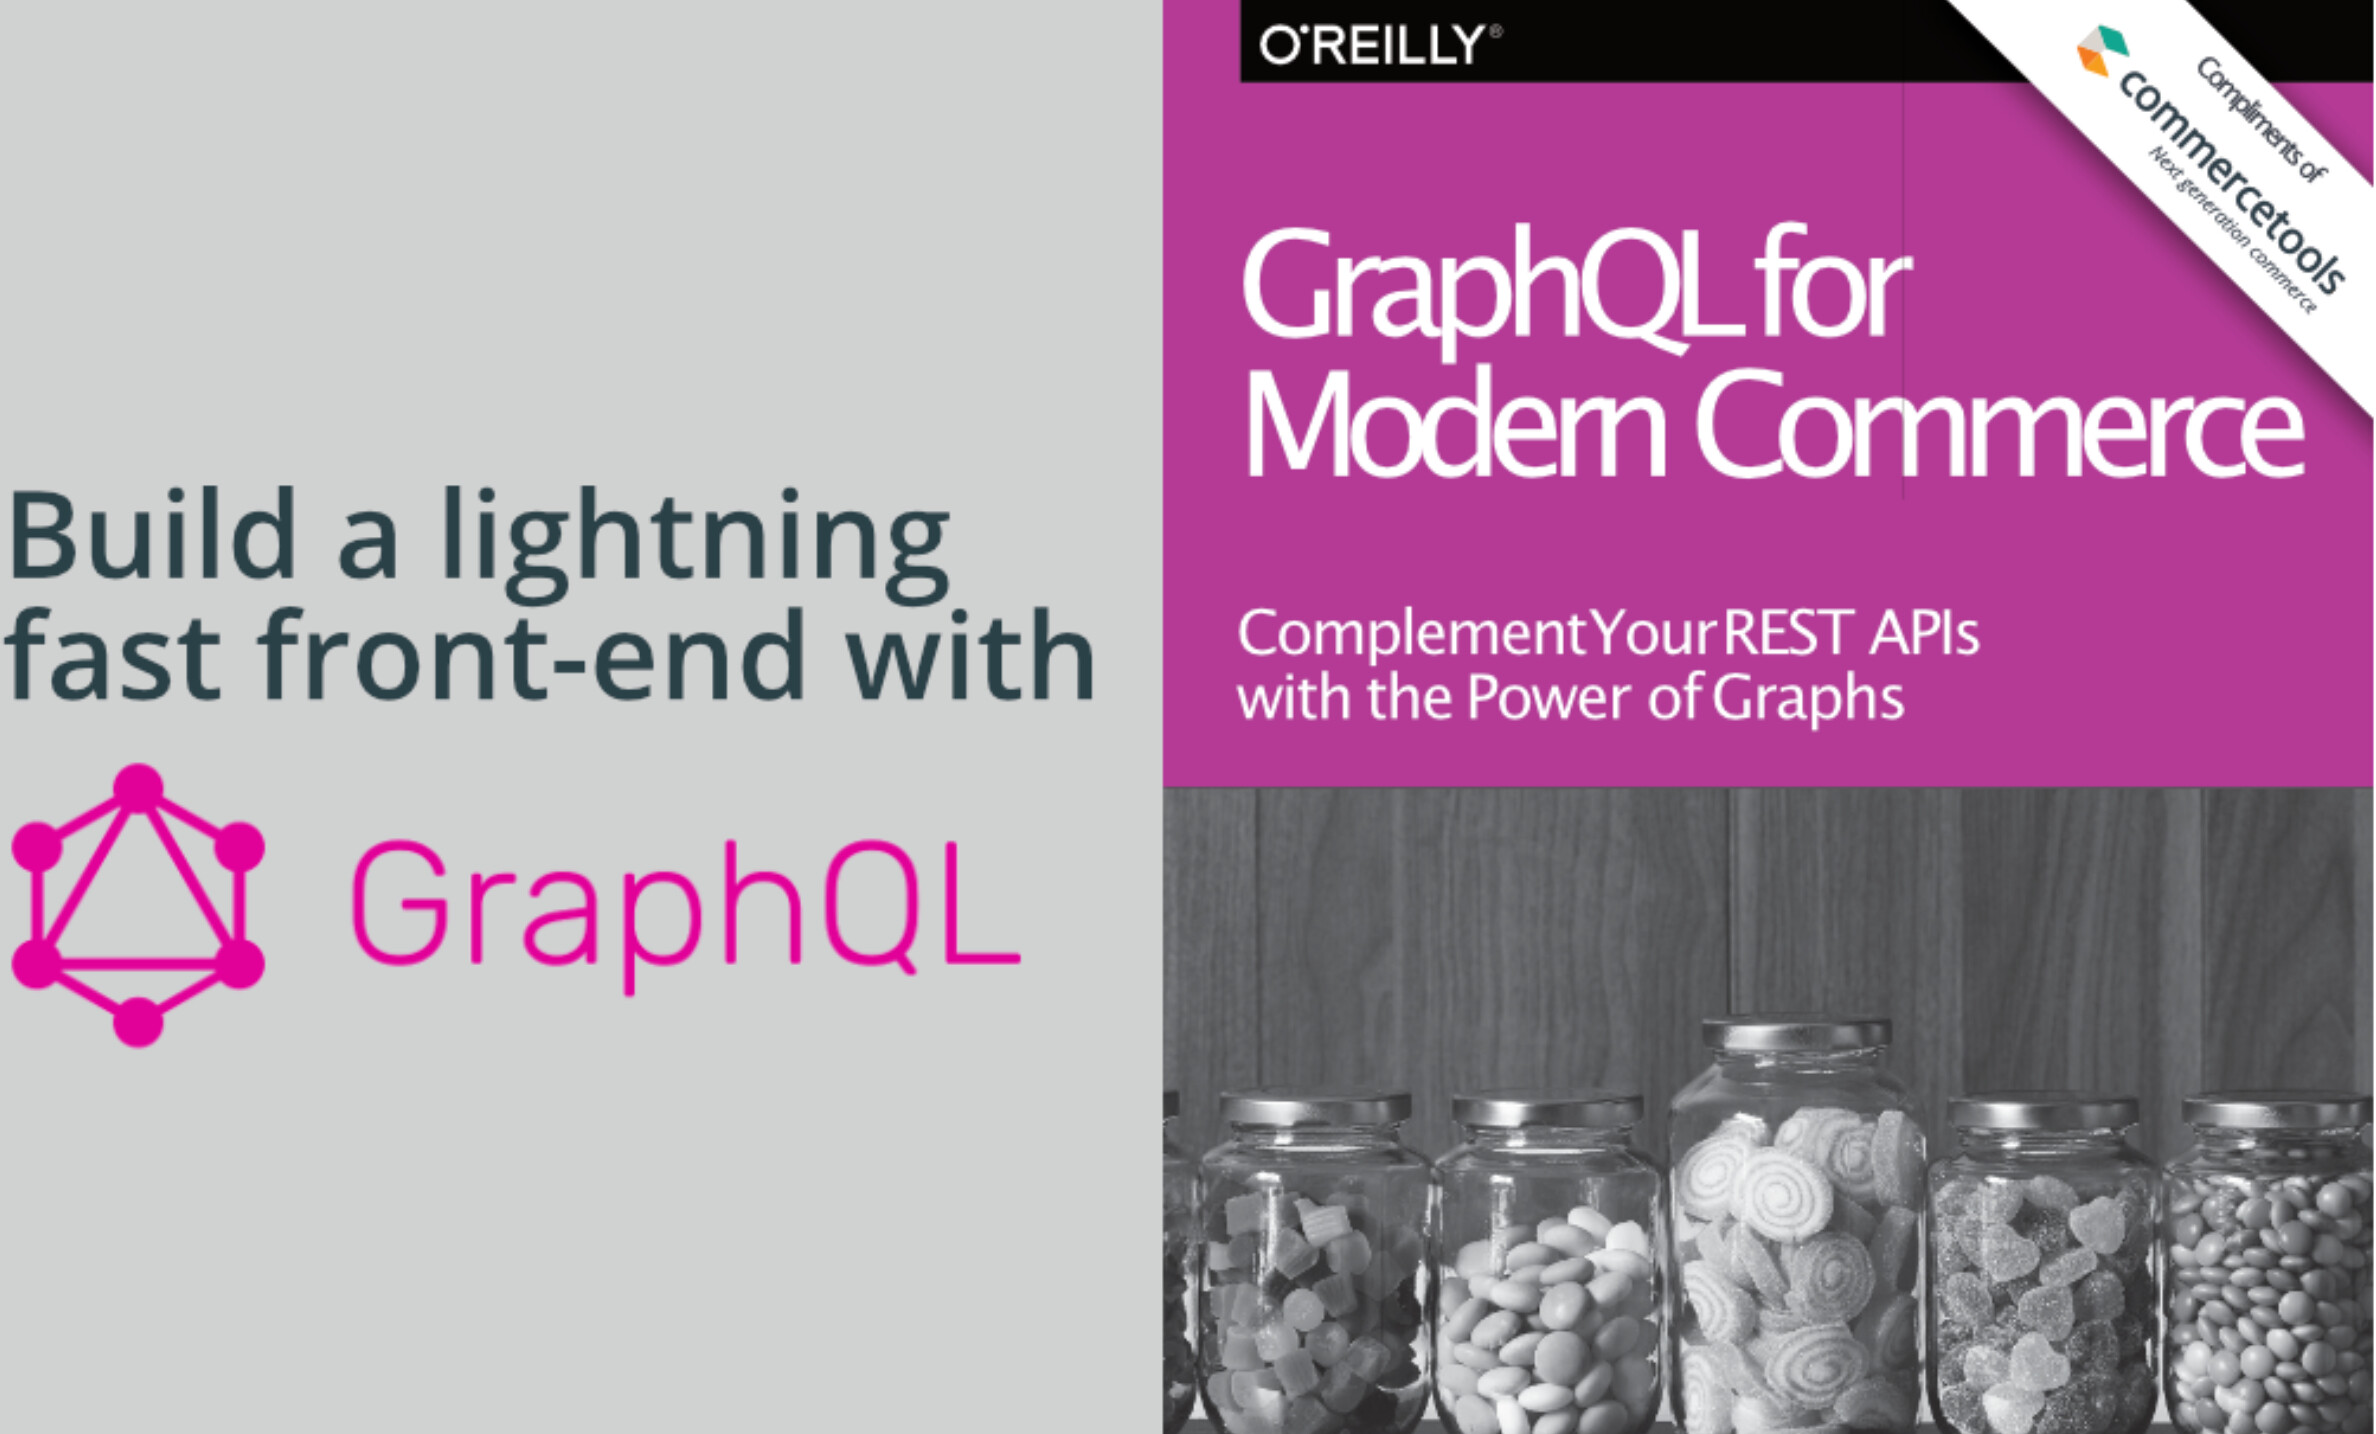 Build a lightning fast front-end with commercetools GraphQL